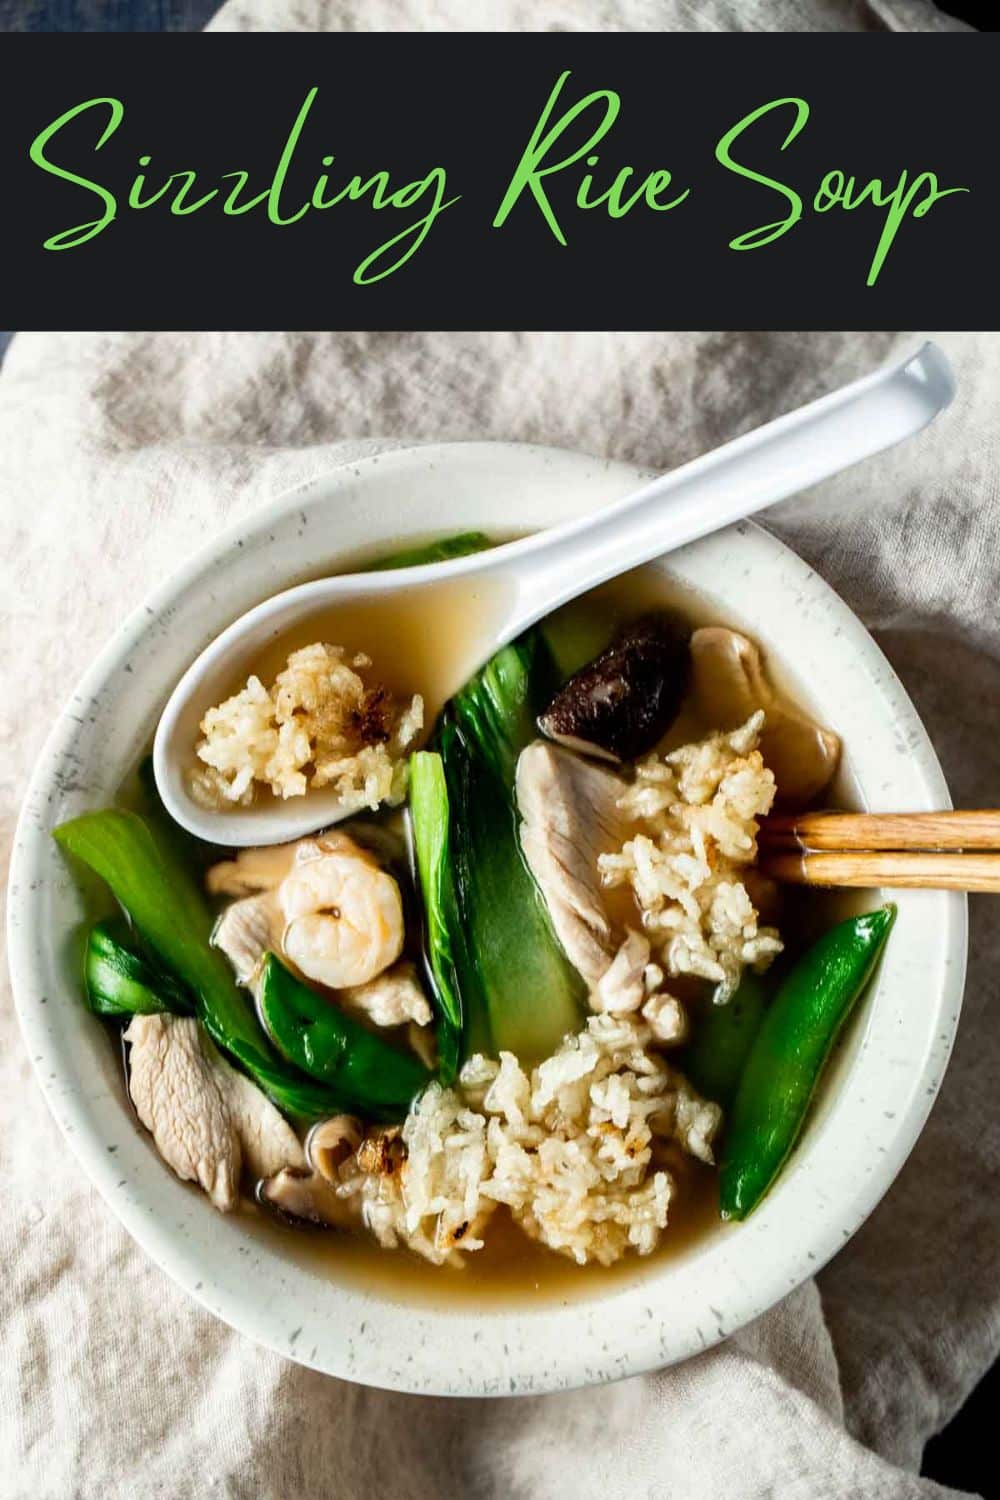 Sizzling Rice Soup: Step By Step Instructions